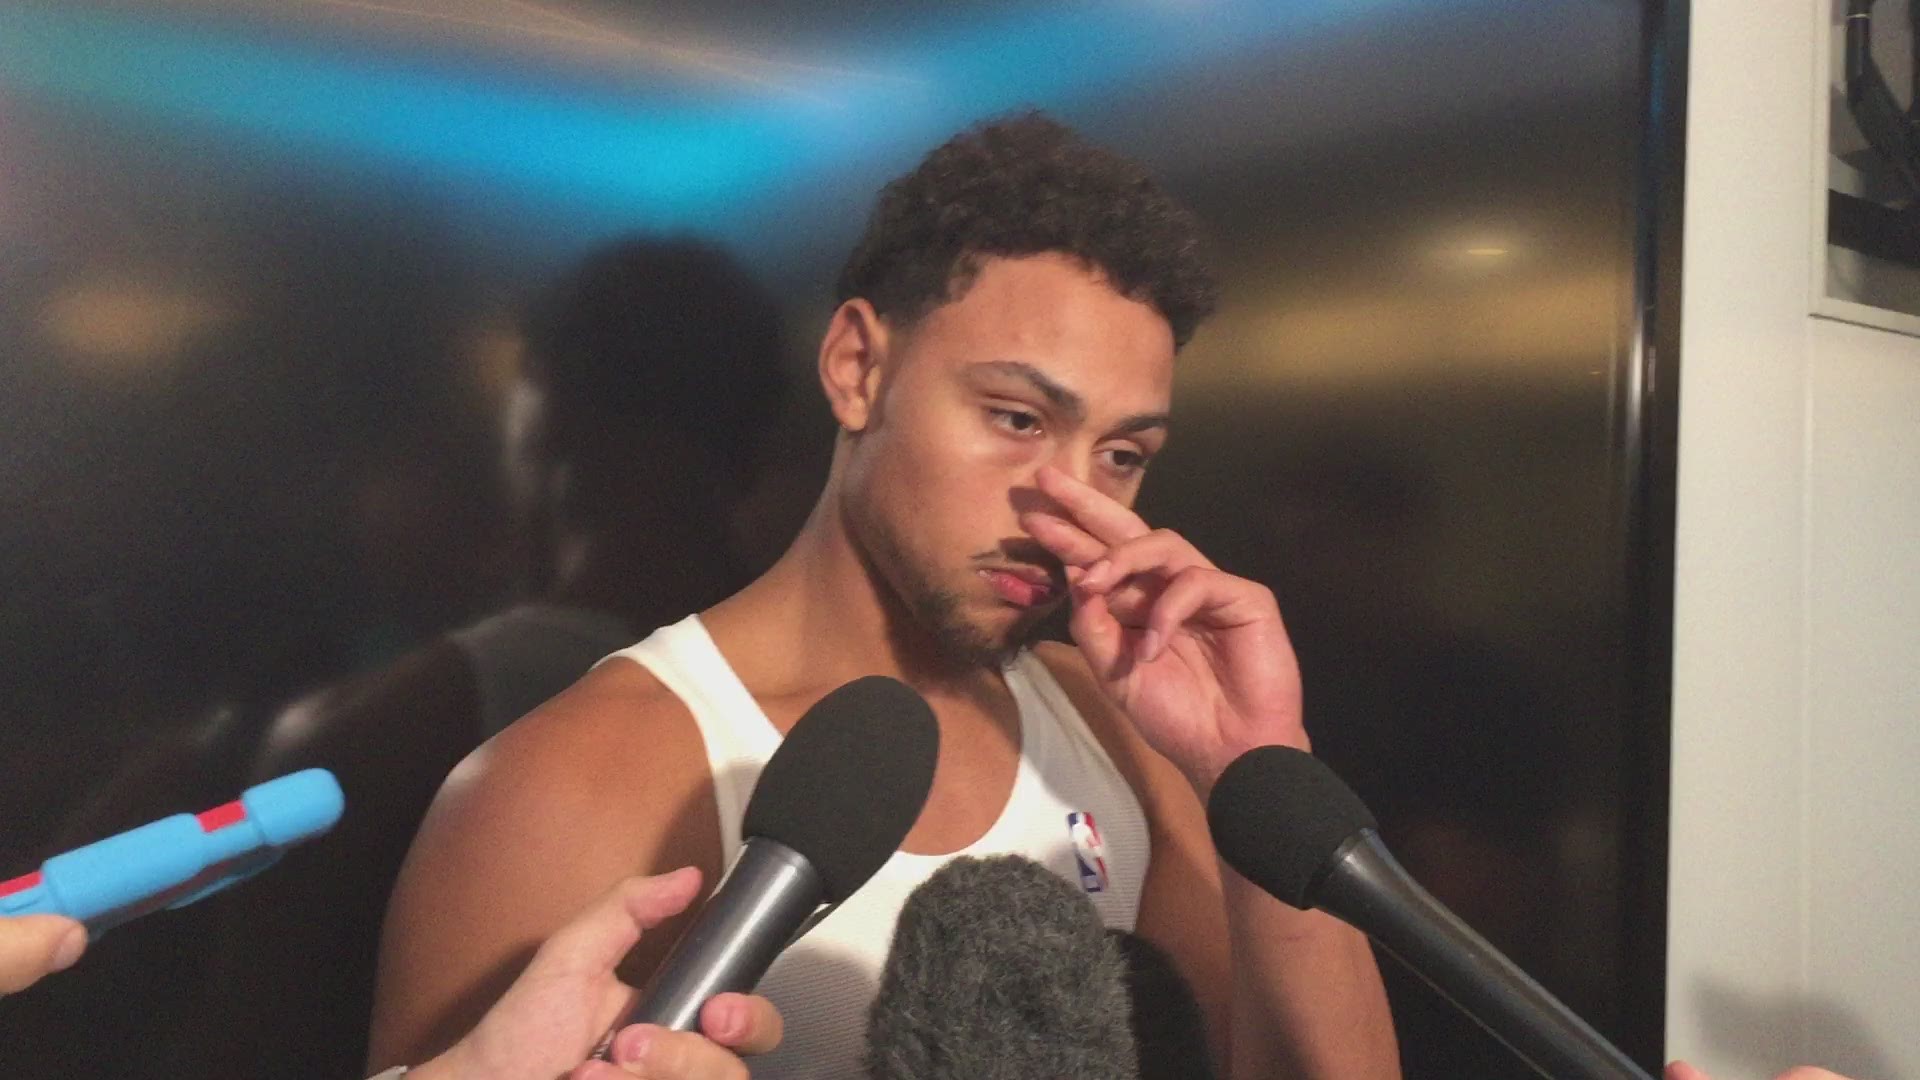 Spurs guard Bryn Forbes on his game Saturday night